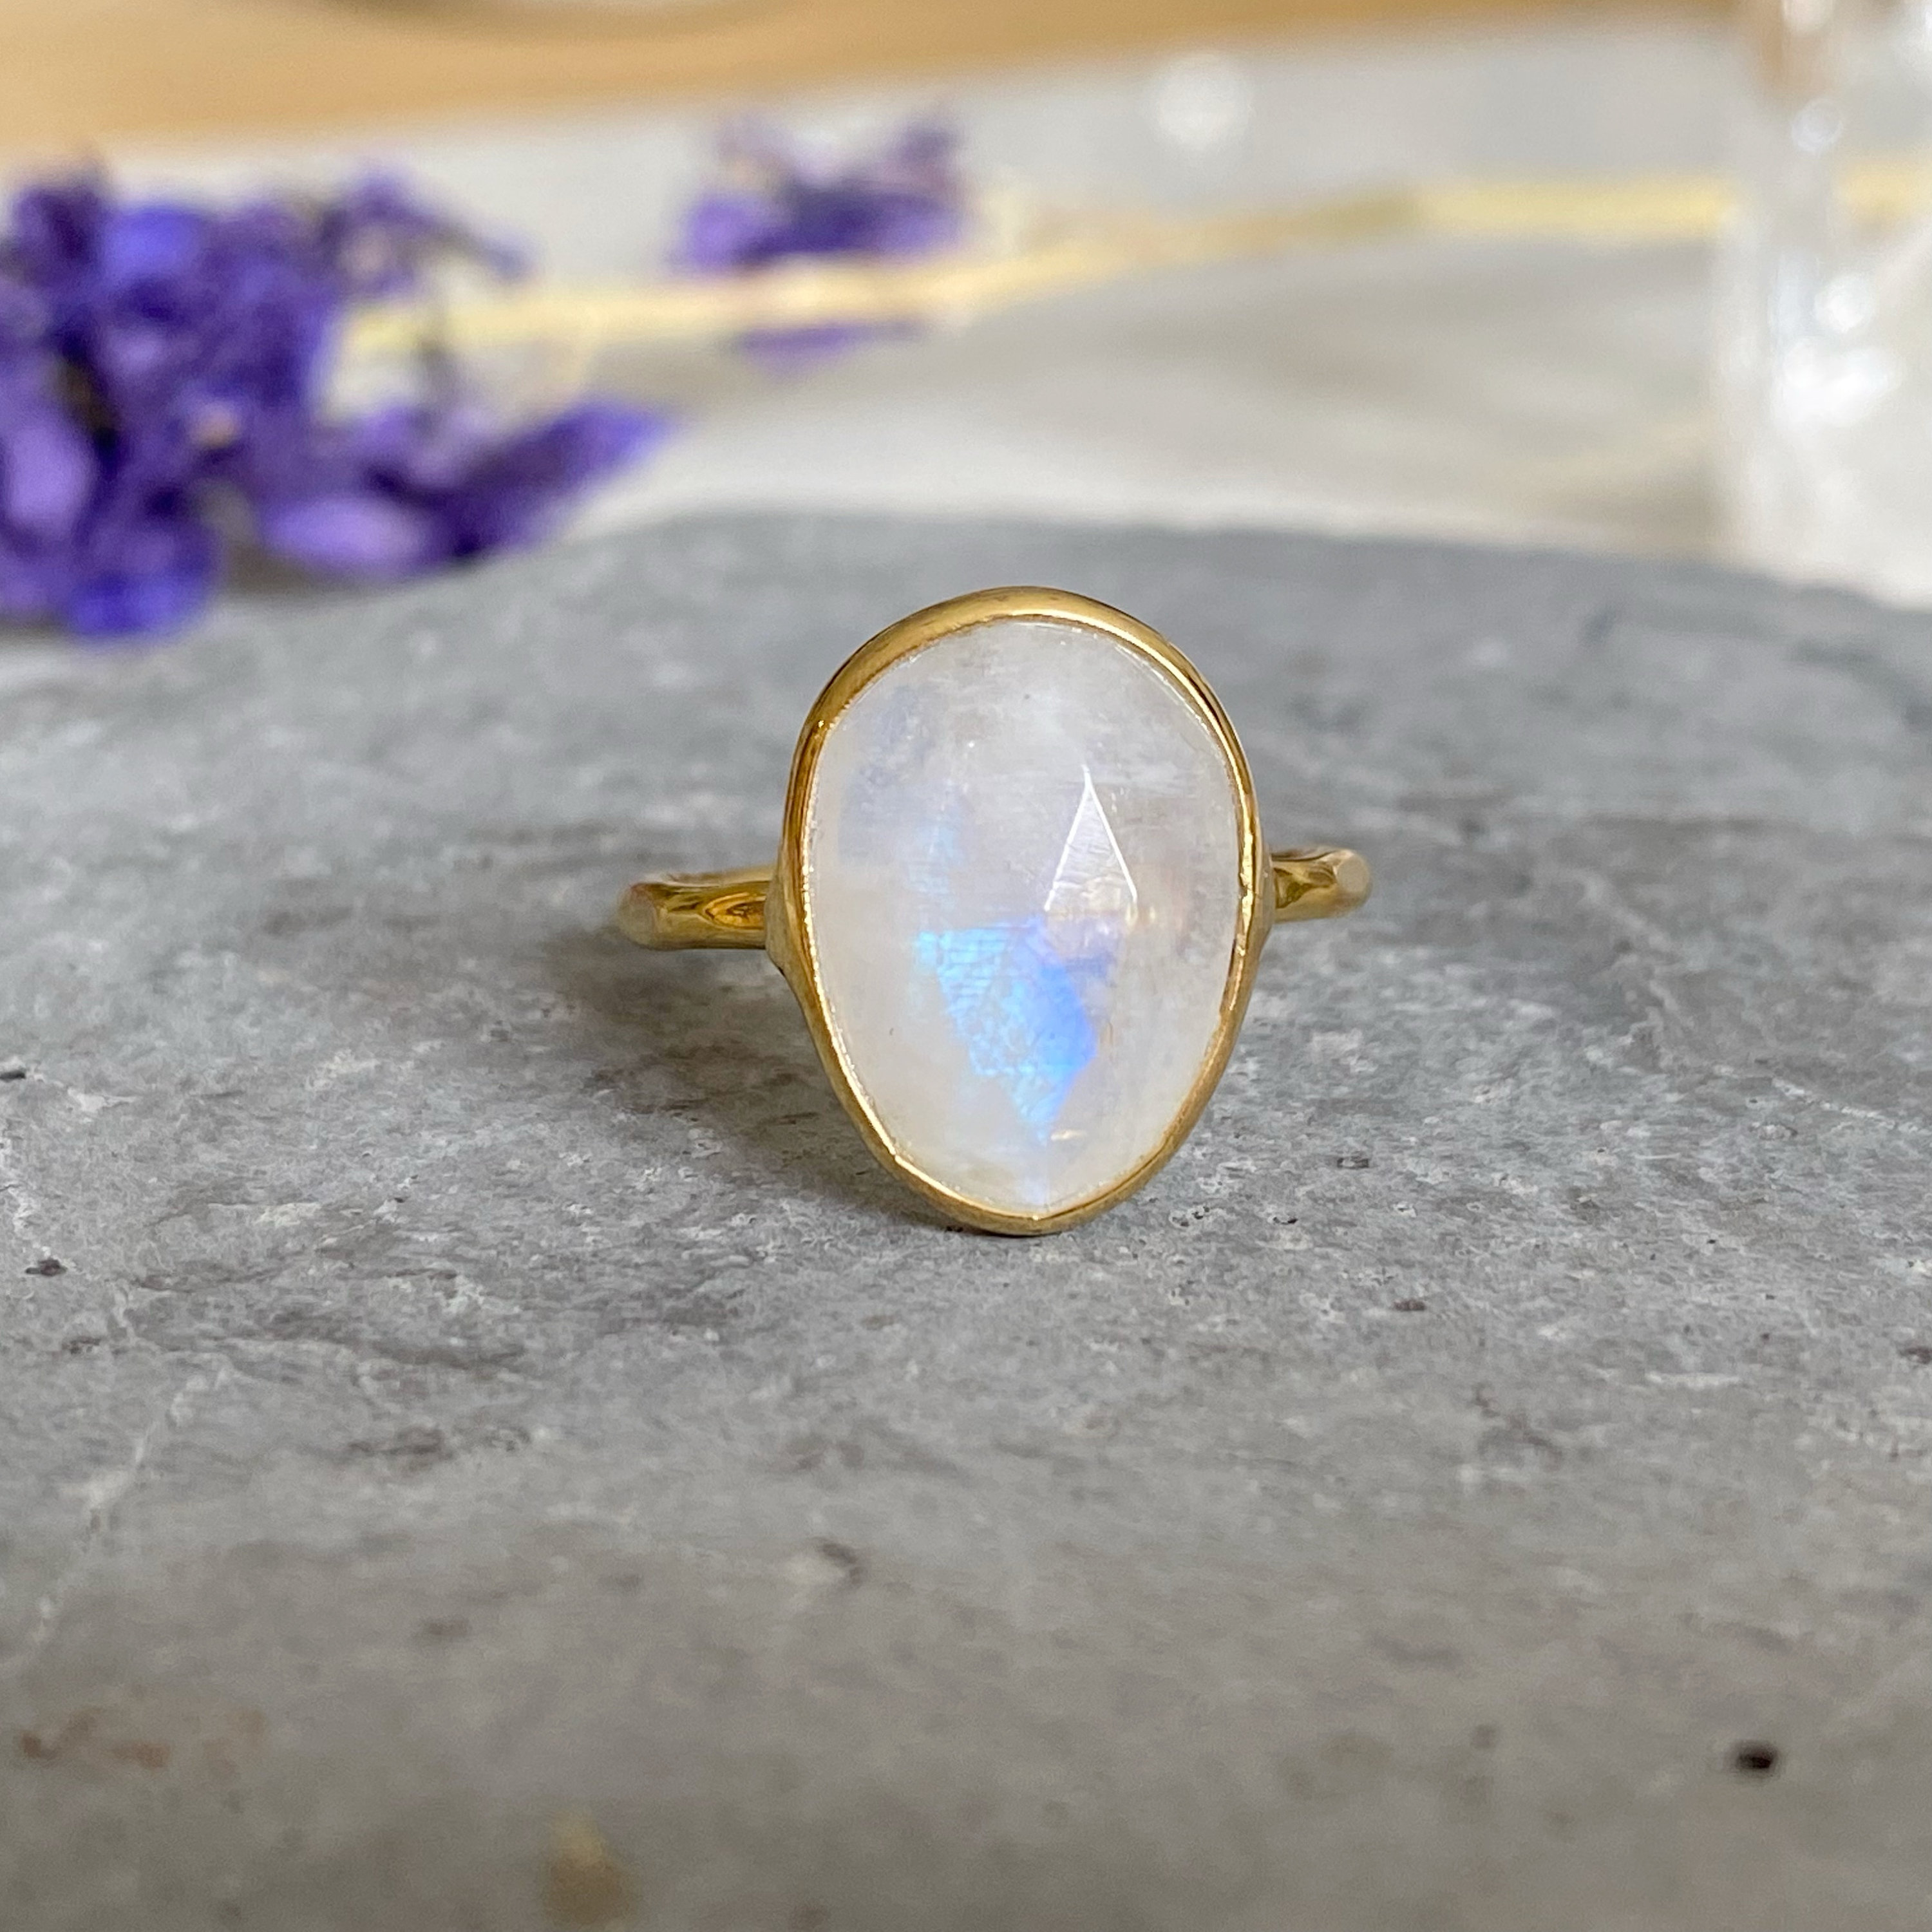 Buy Moonstone Ring, Gift for Her, Sterling Silver Jewelry, Crescent Moon  Ring, Midi Ring, Gift Rings, Crescent Moonstone Ring, Birthstone Rings  Online in India - Etsy